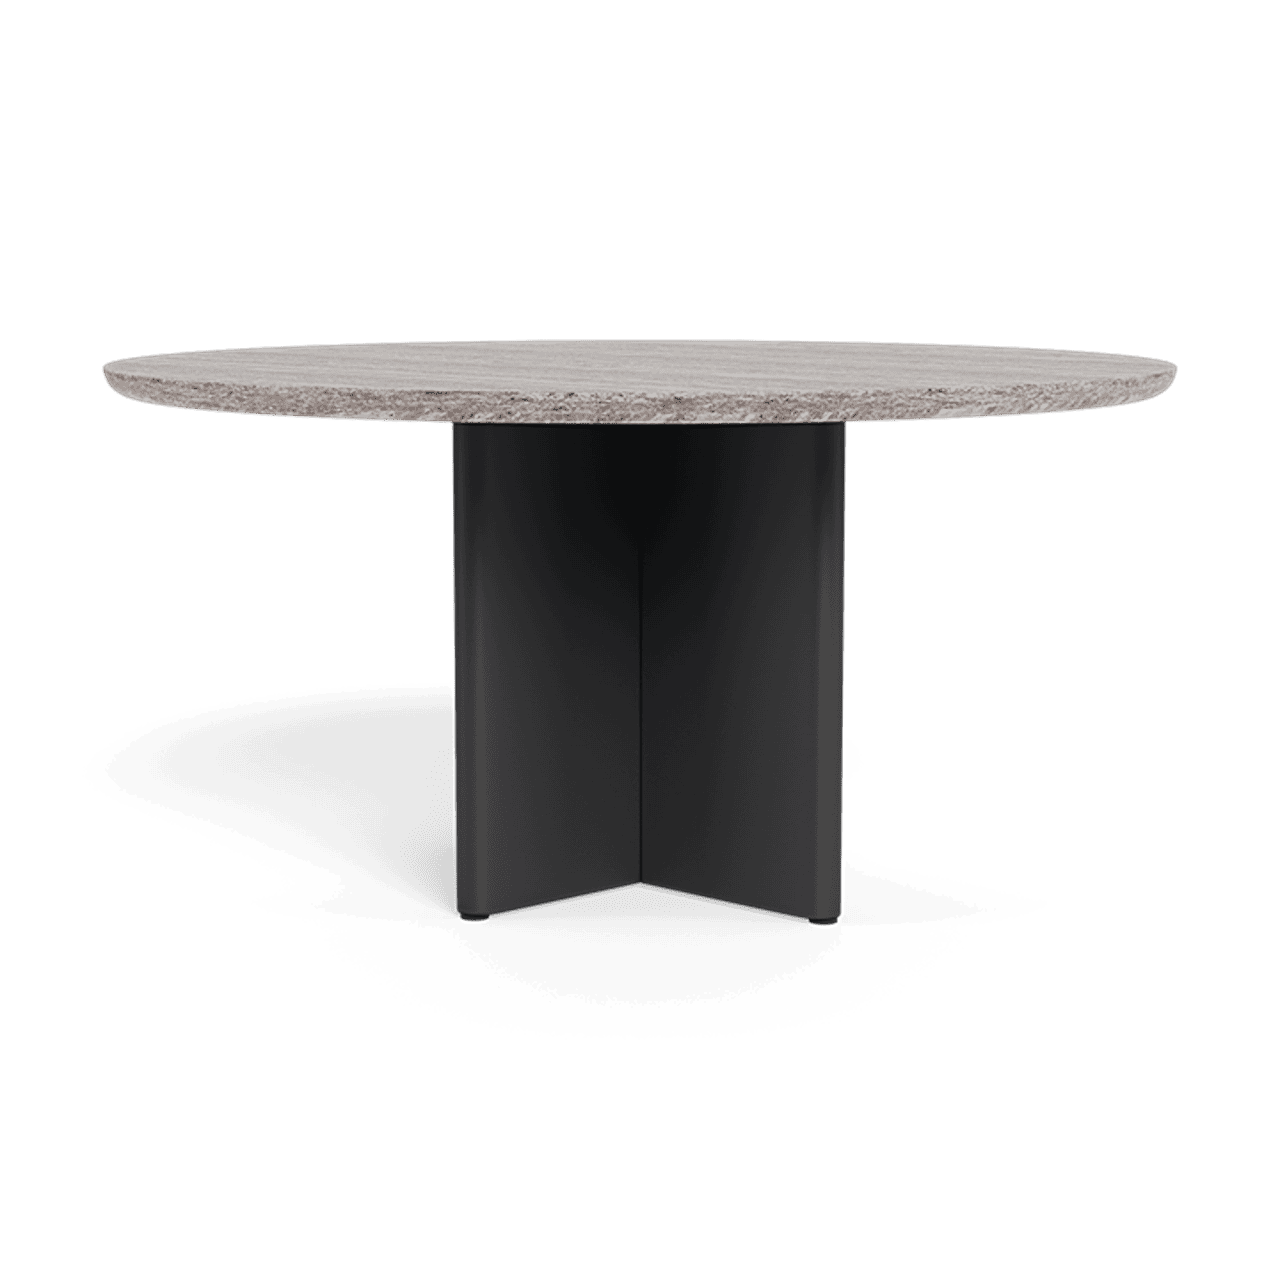 VICTORIA STONE ROUND DINING TABLE 60"-Aluminum Asteroid Frame